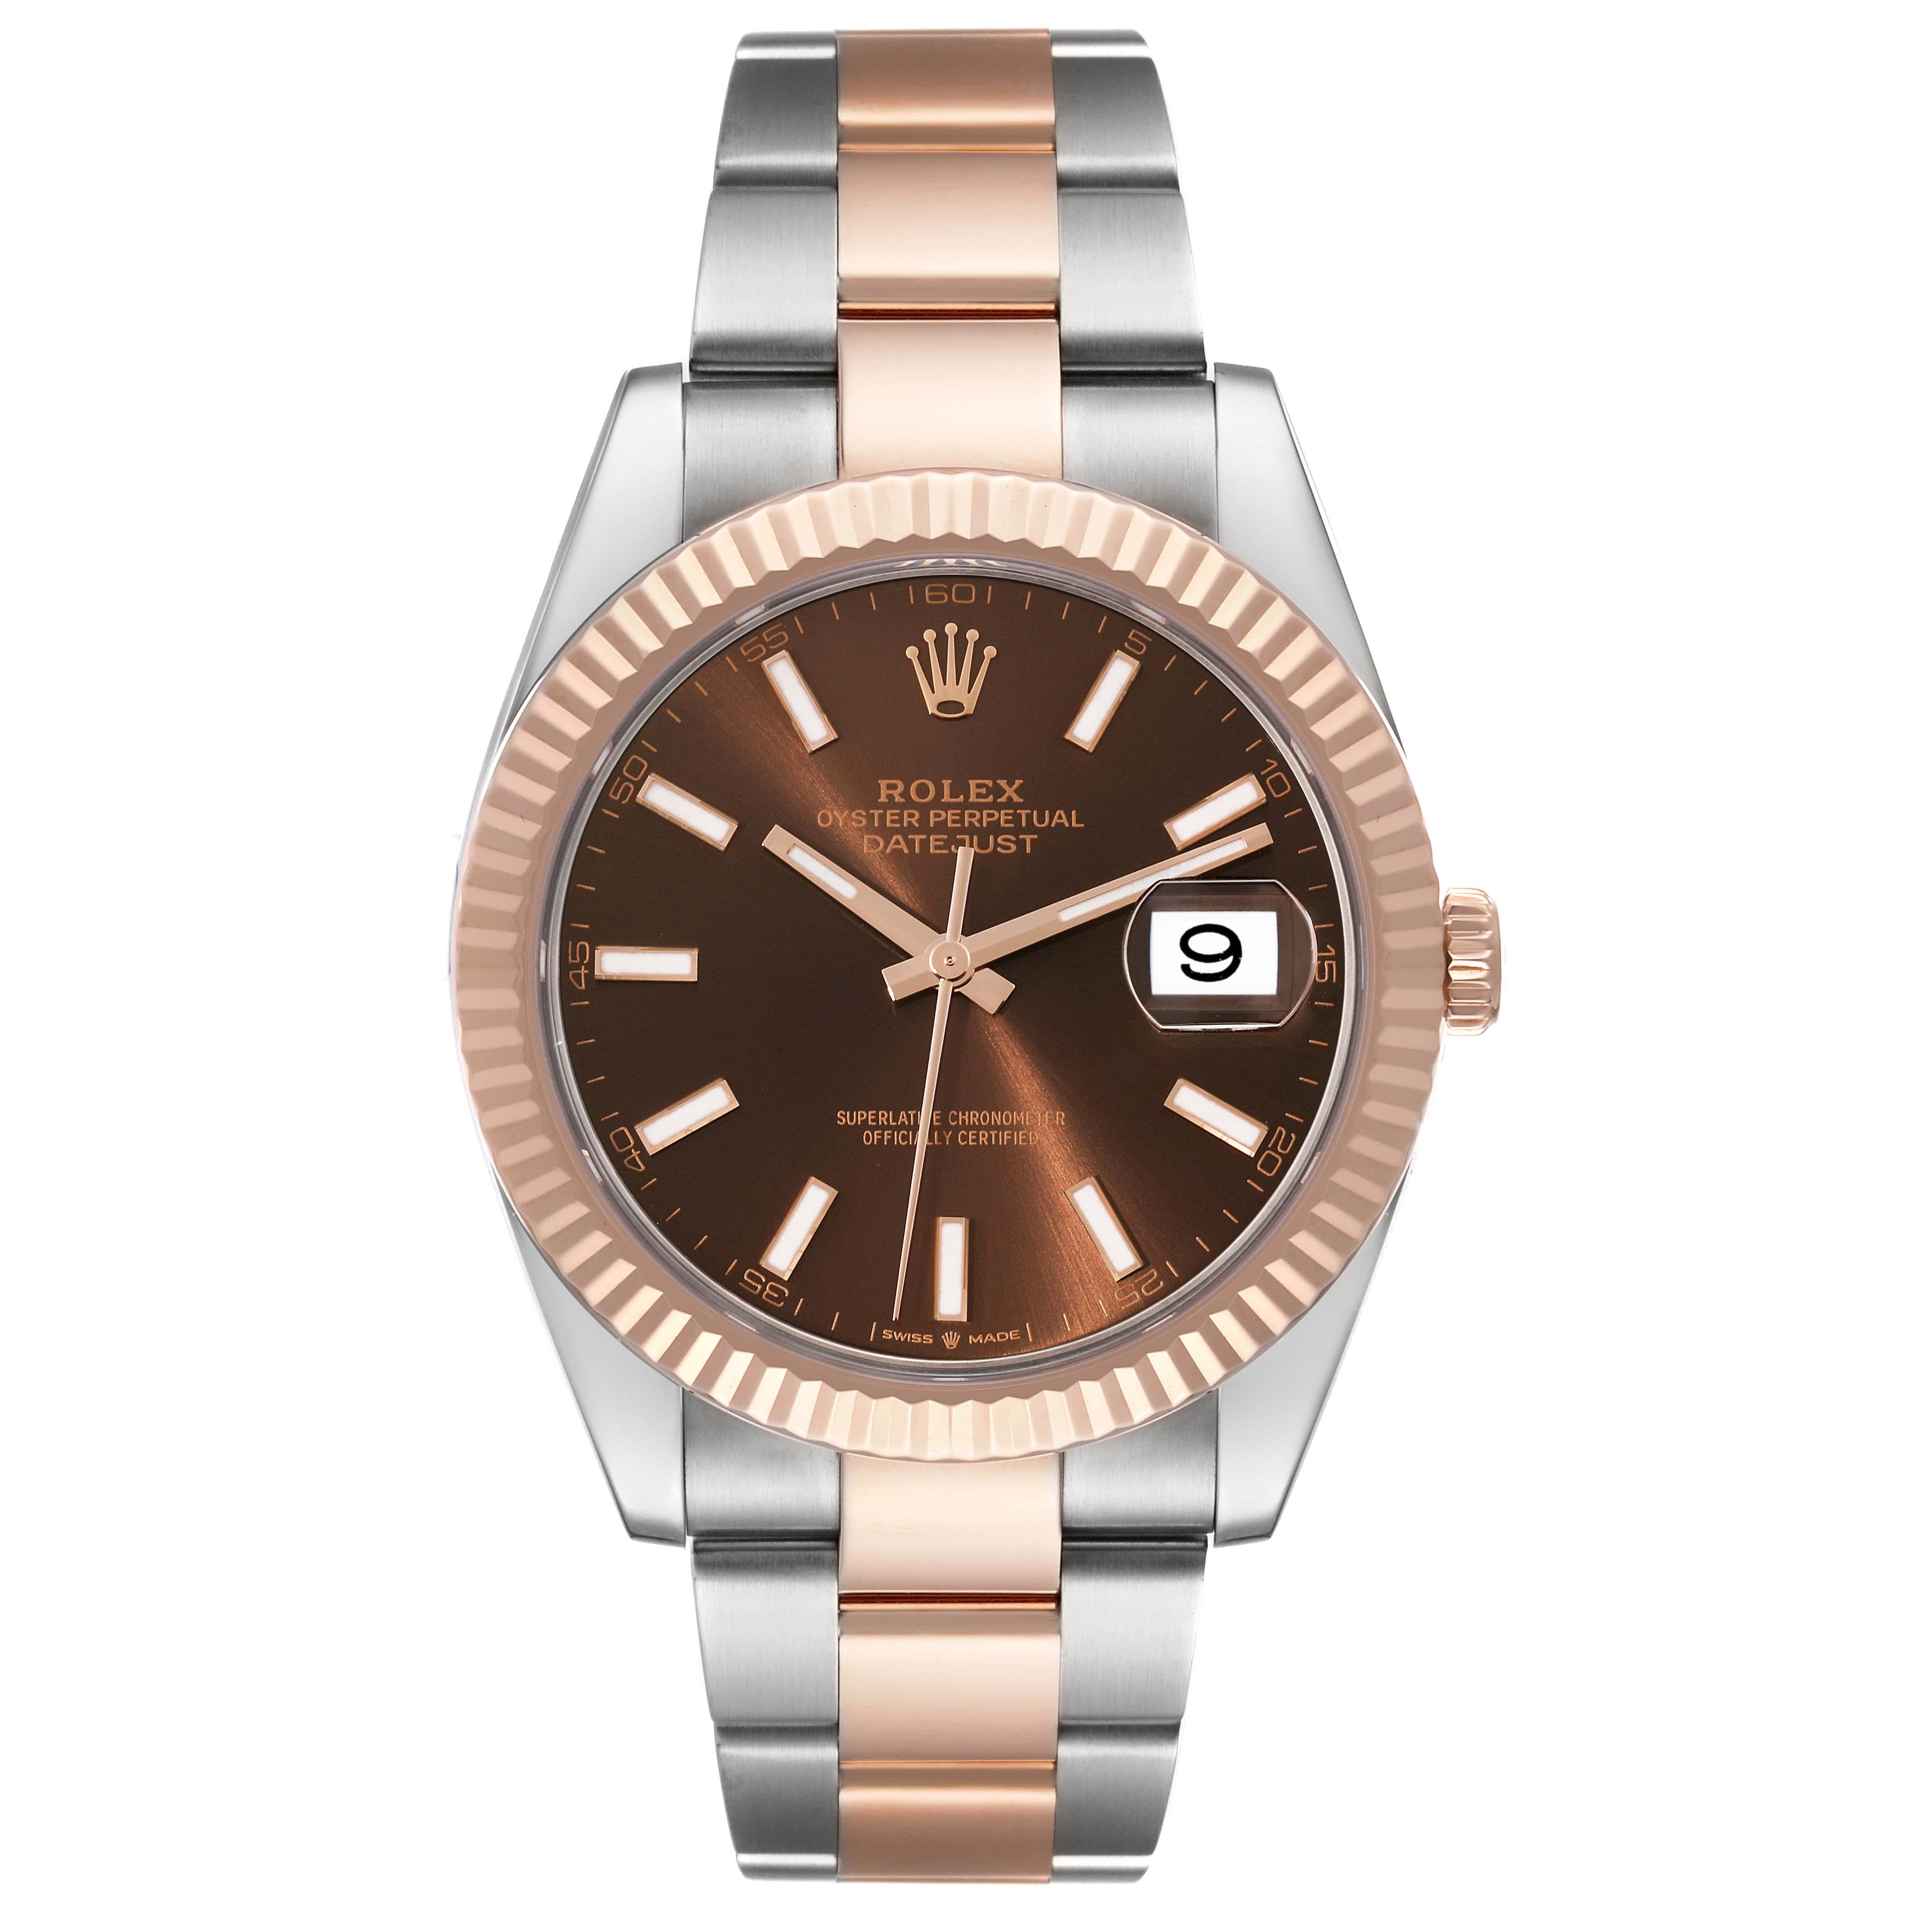 Rolex Datejust 41 Steel Rose Gold Chocolate Dial Mens Watch 126331 Box Card. Officially certified chronometer automatic self-winding movement. Stainless steel and 18K Everose gold case 41.0 mm in diameter. Rolex logo on the crown. 18K Everose gold